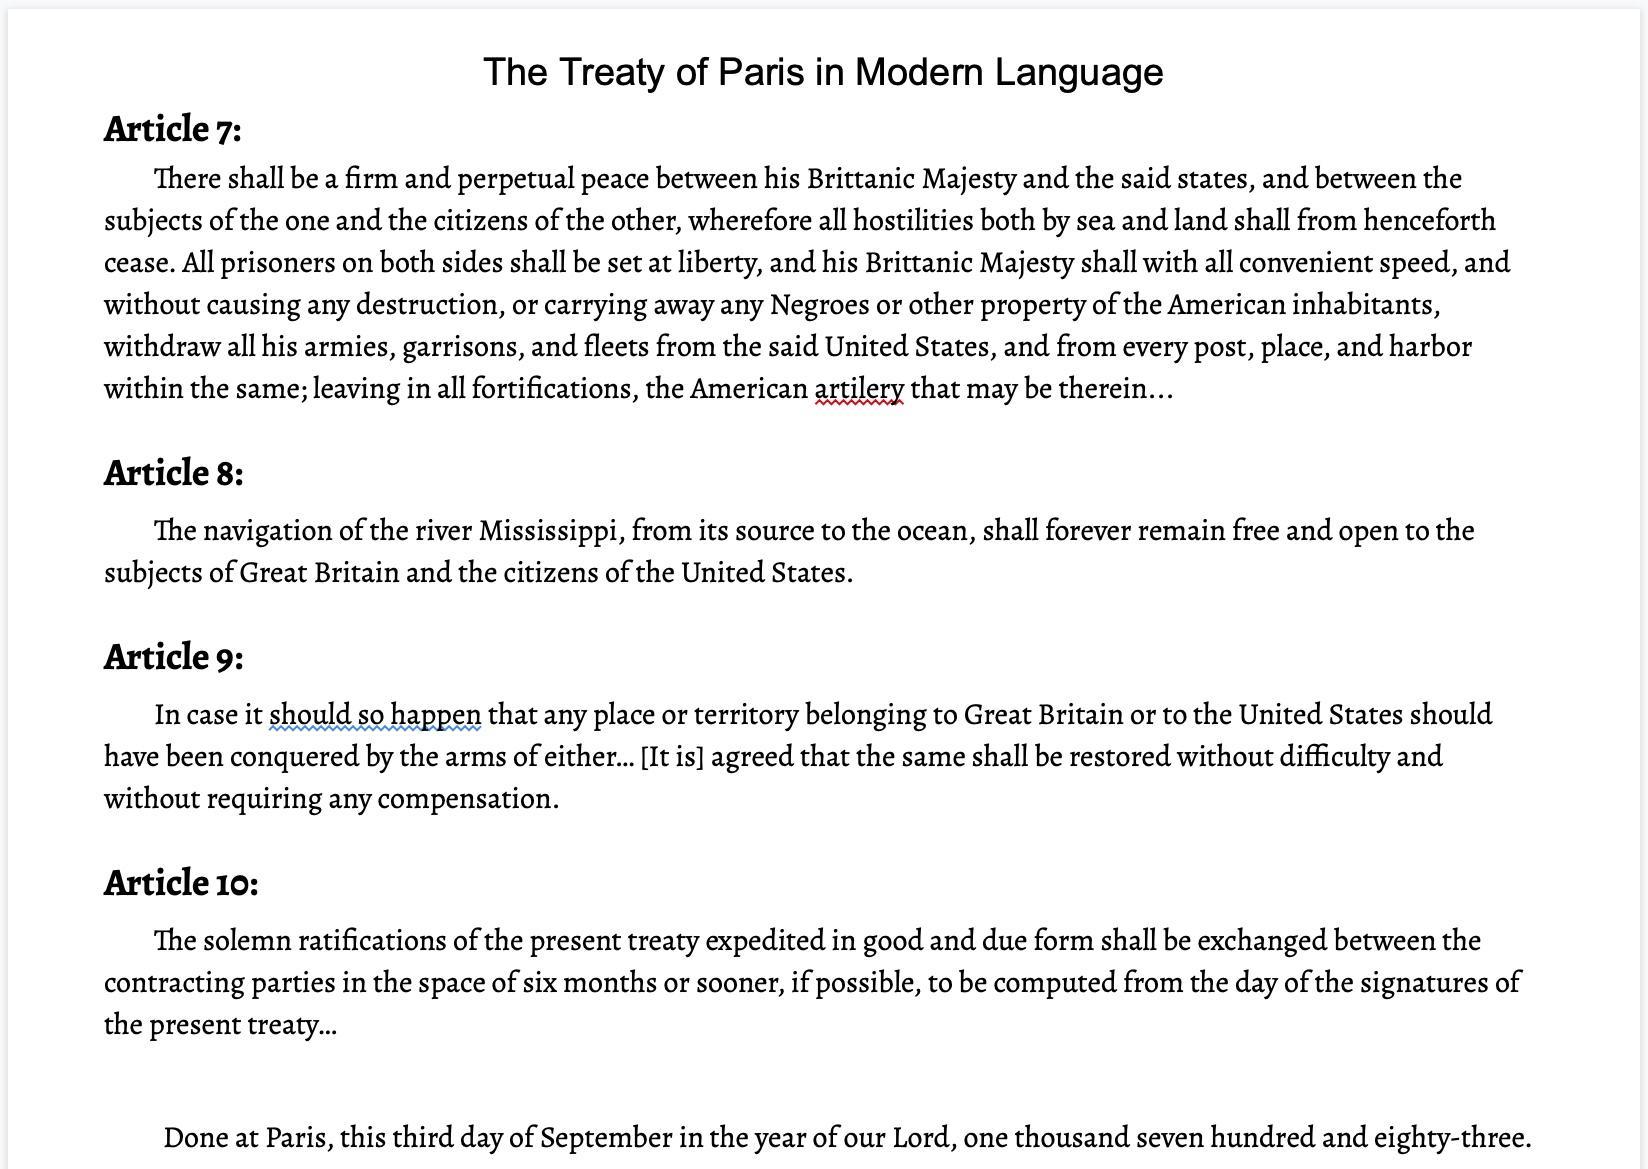 Read The The Treaty Of Paris In Modern Language Article To Answer The Questions!